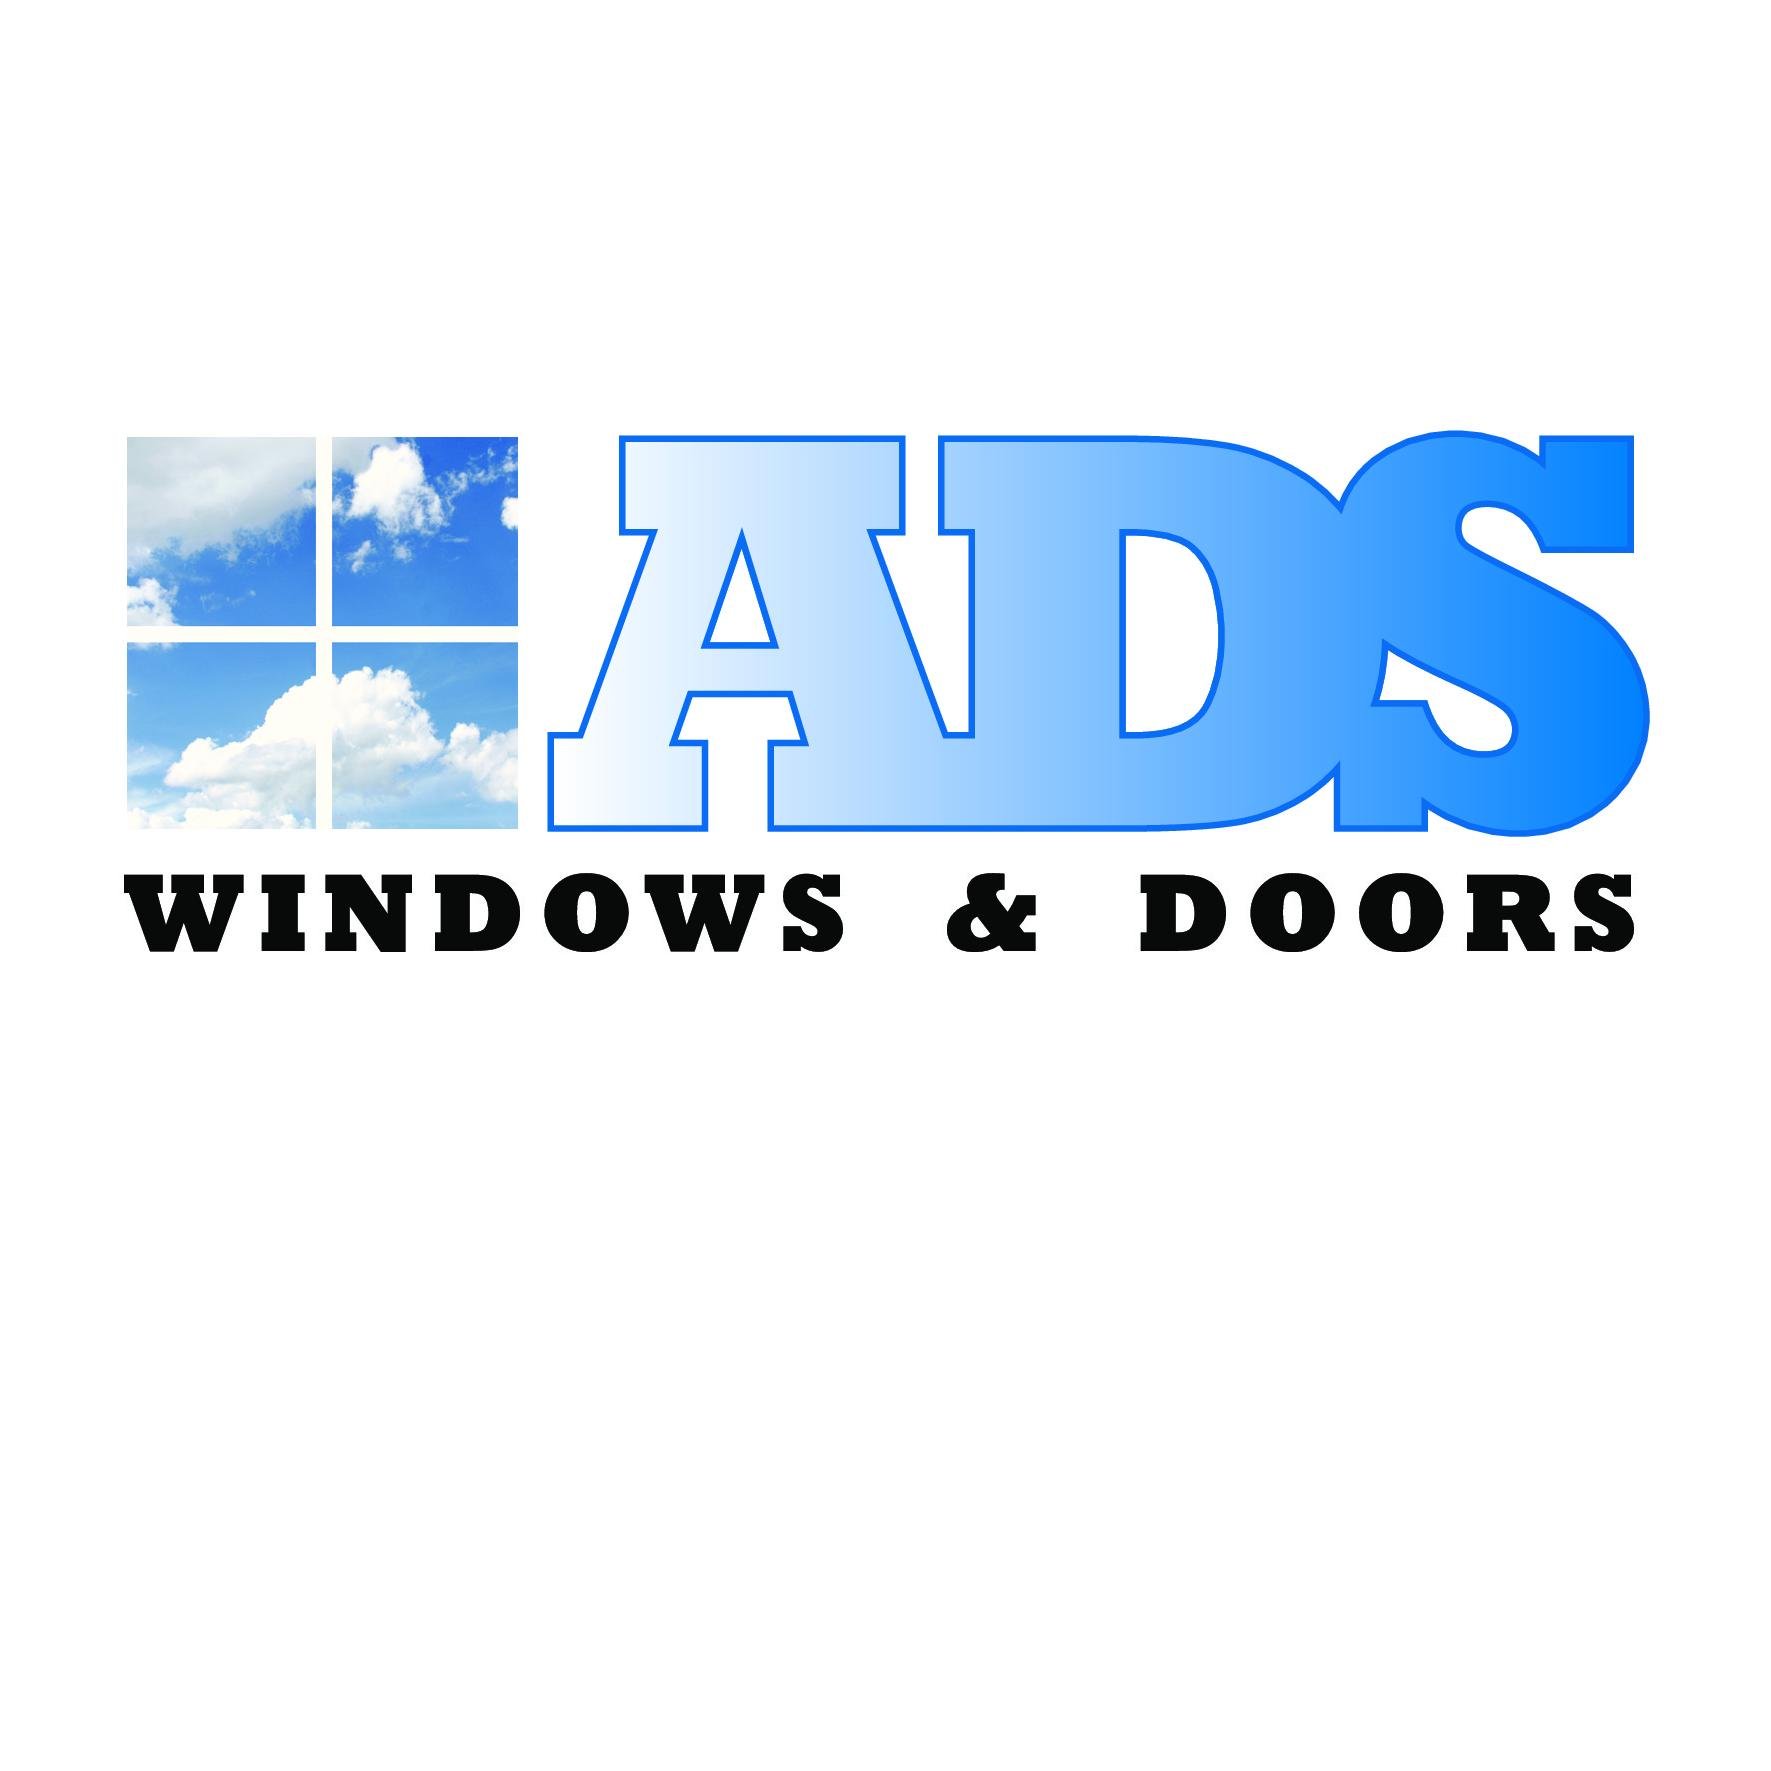 Welcome to ADS Windows and Doors Ltd, suppliers of quality uPVC Windows, uPVC Doors, Conservatories and Blinds.